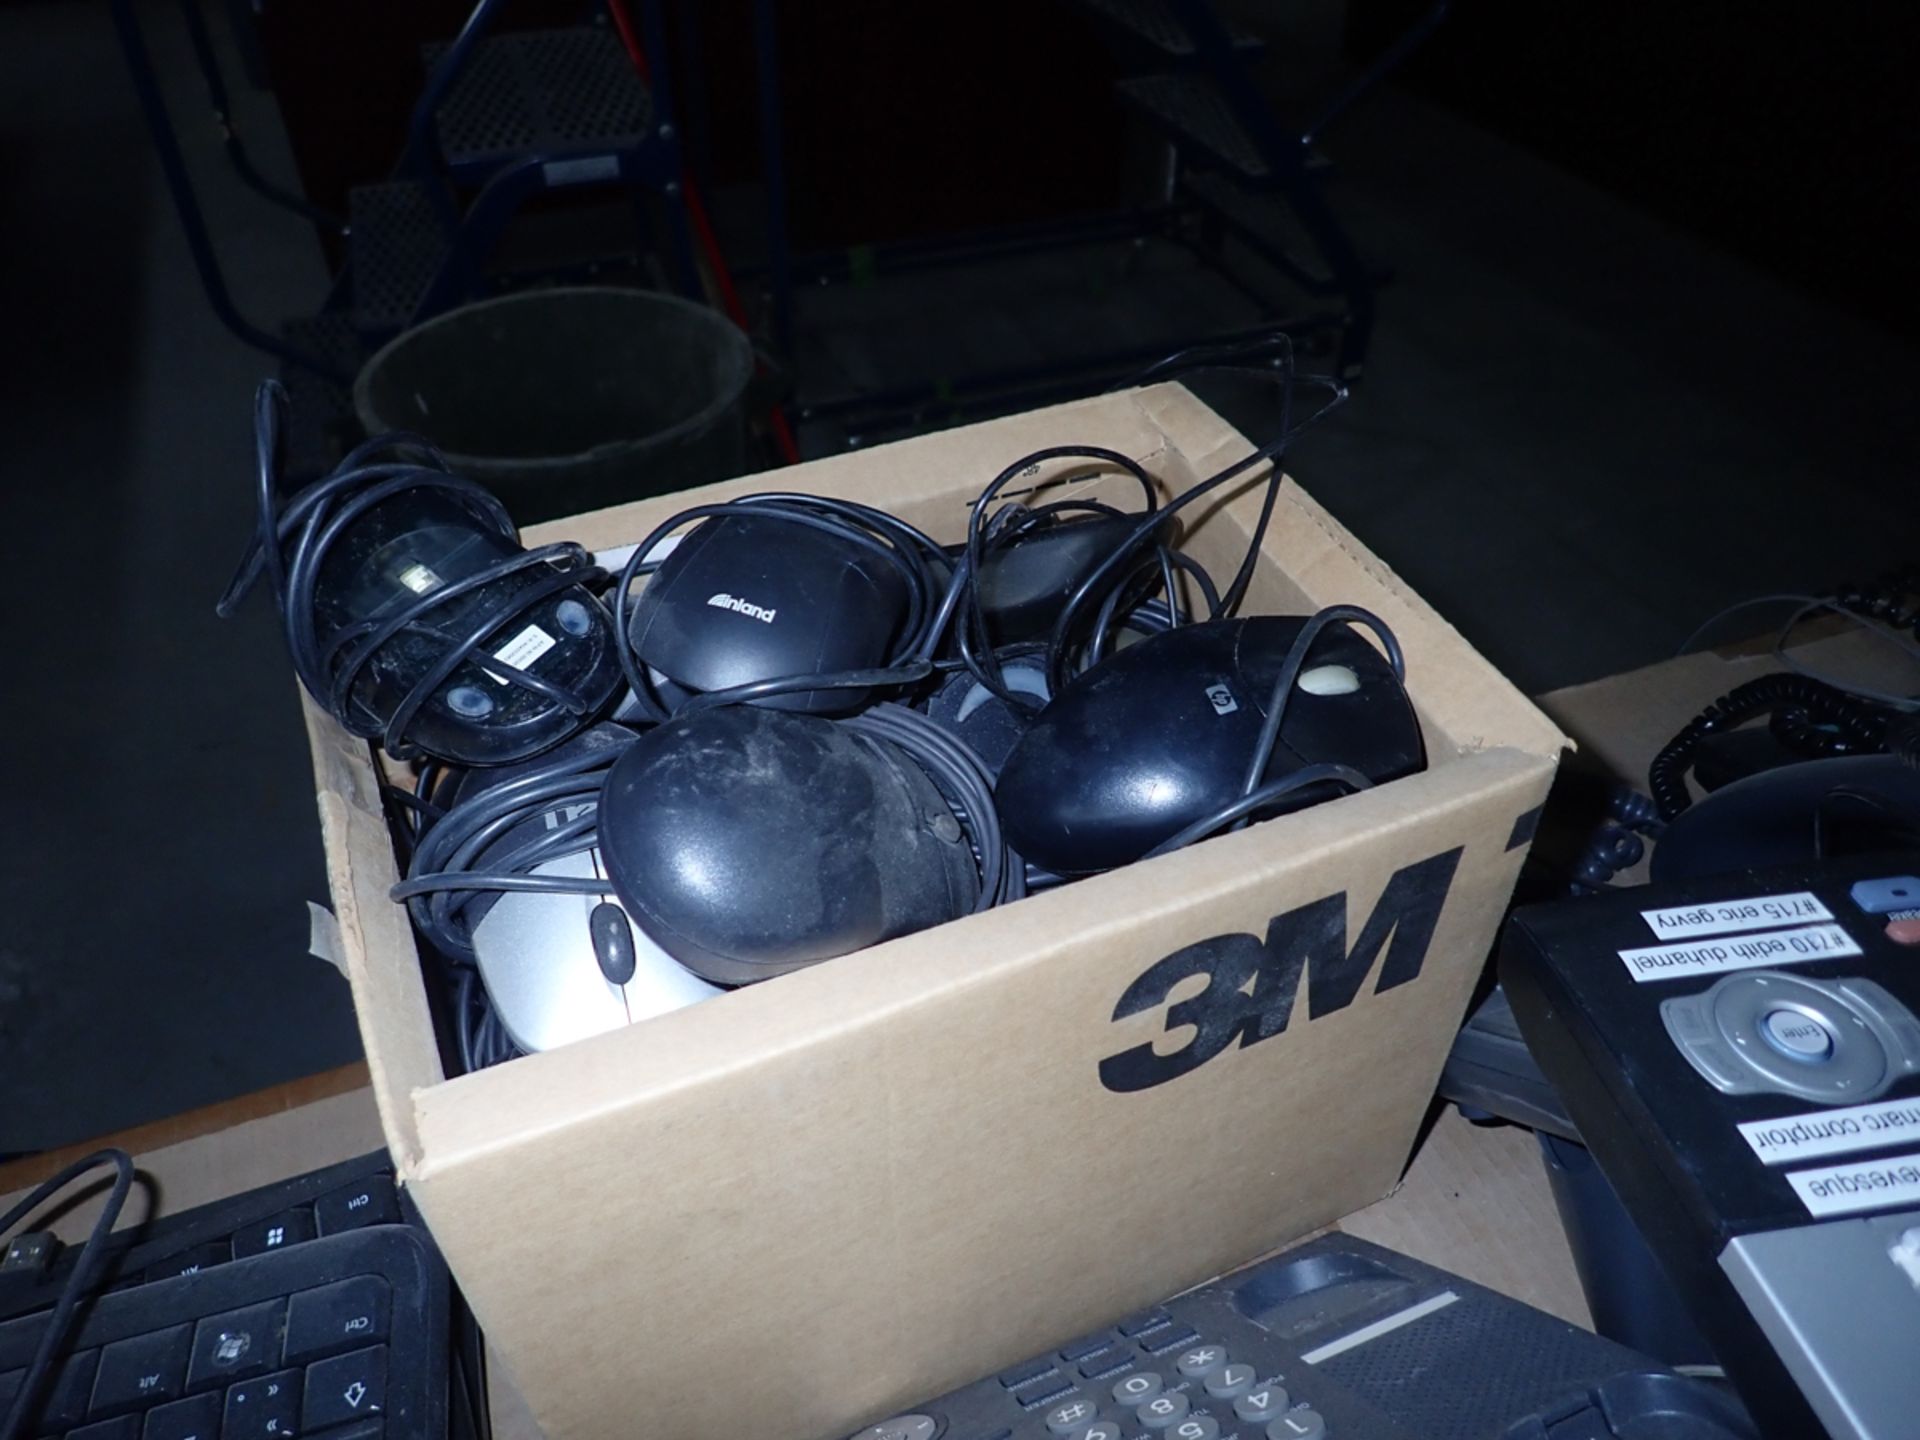 LOT OF ASSORTED KEYBOARD & MOUSES (+/- 50 PIECES) / LOT DE CLAVIERS ET SOURIS ASSORTIS )+/- 50 - Image 2 of 2